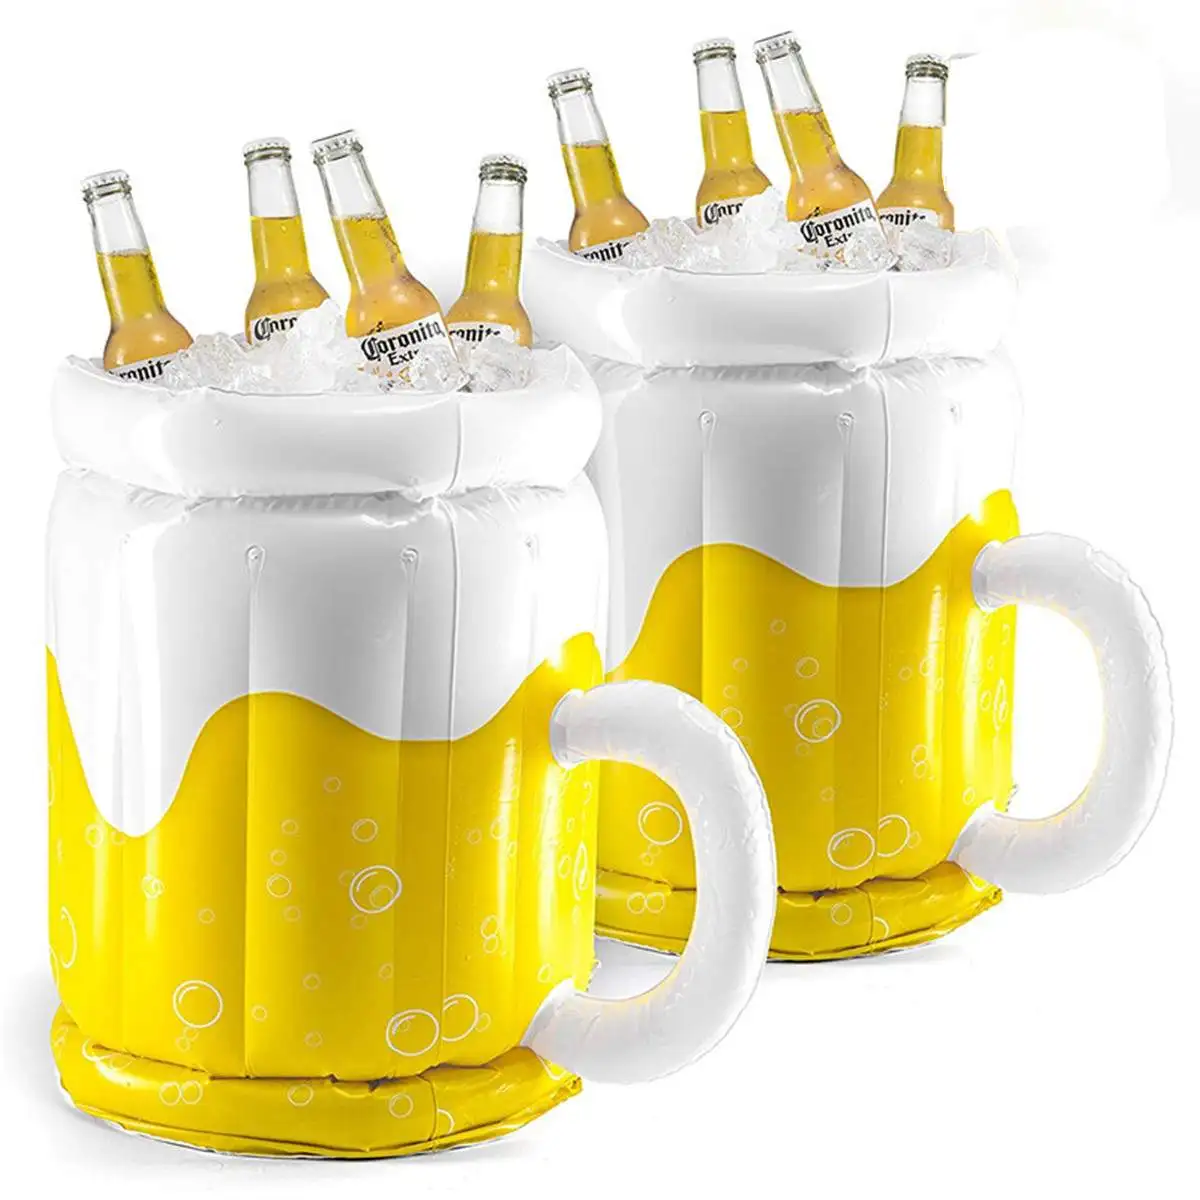 Large, Yellow Plastic Reusable Party BBQ Summer Party Drinks Wine Beer Ice Bucket Bowl Choice of Sizes